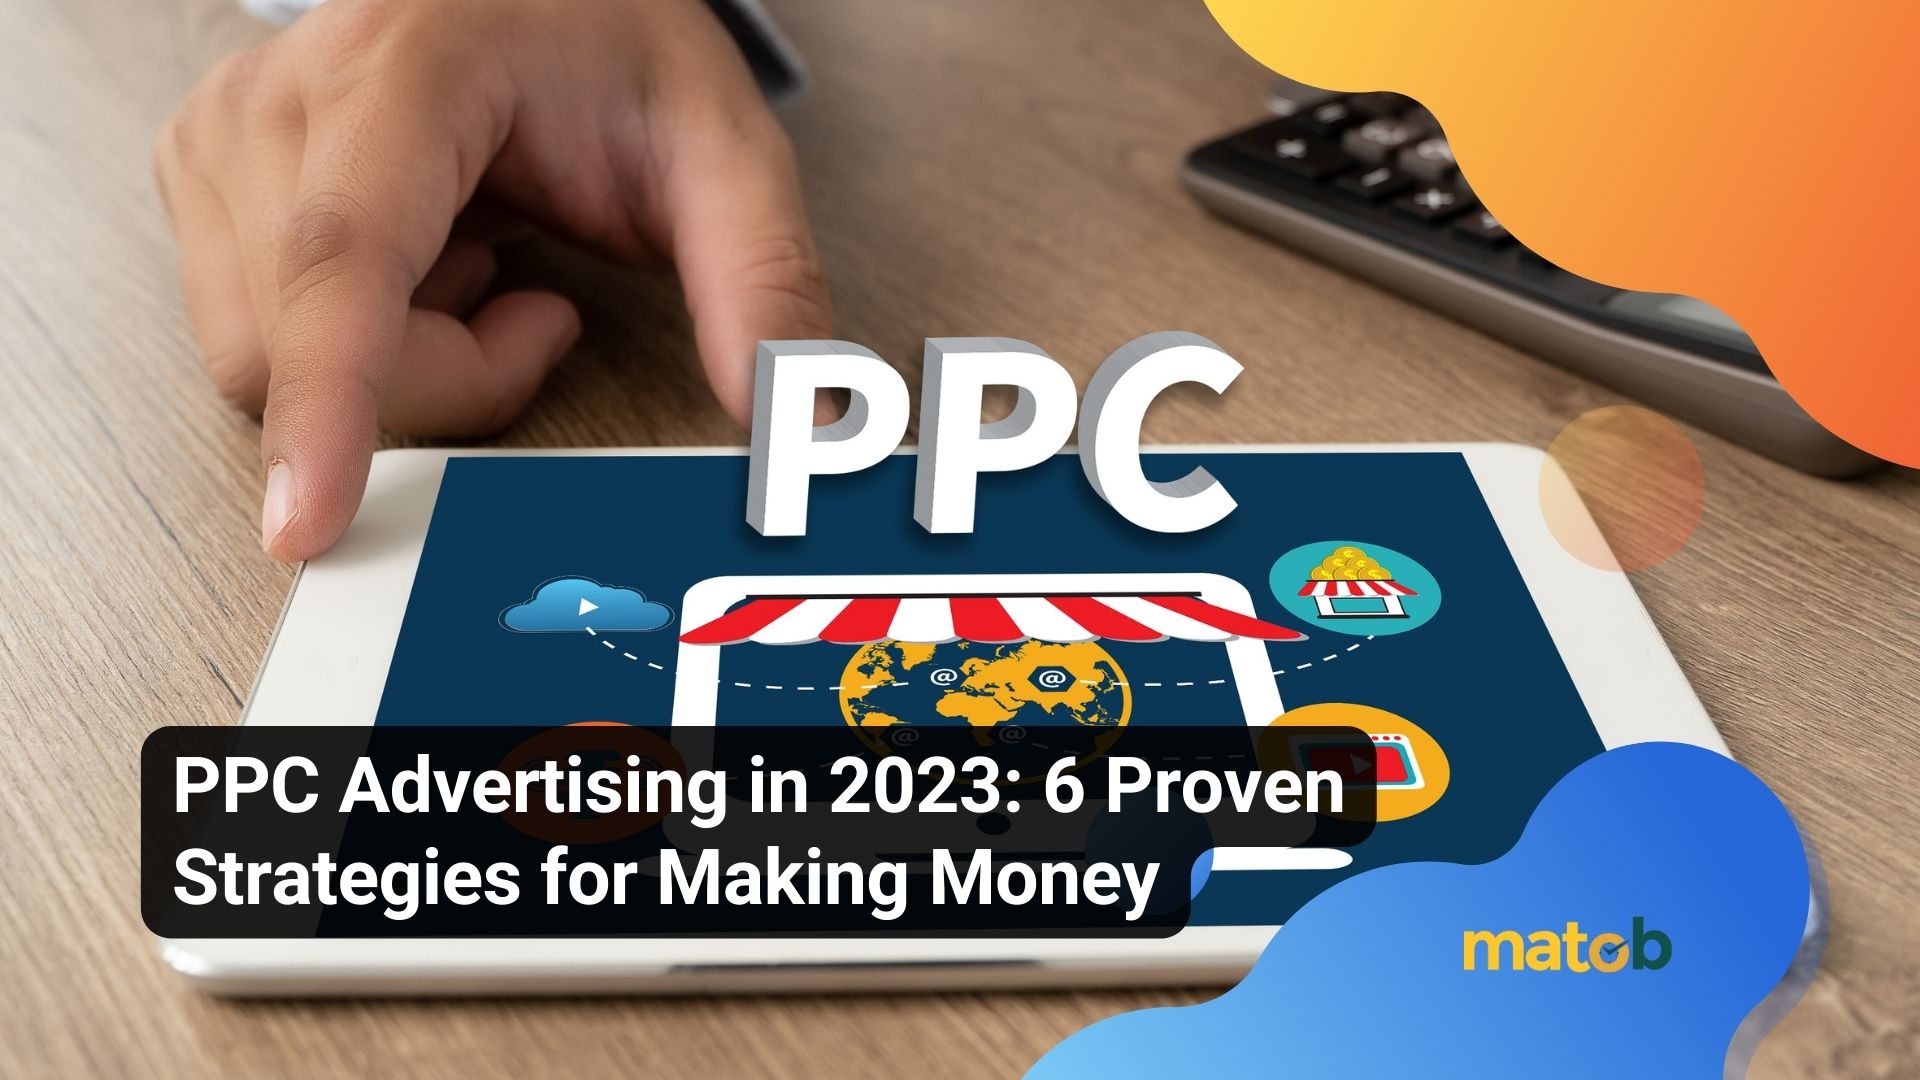 PPC Advertising in 2023: 6 Proven Strategies for Making Money